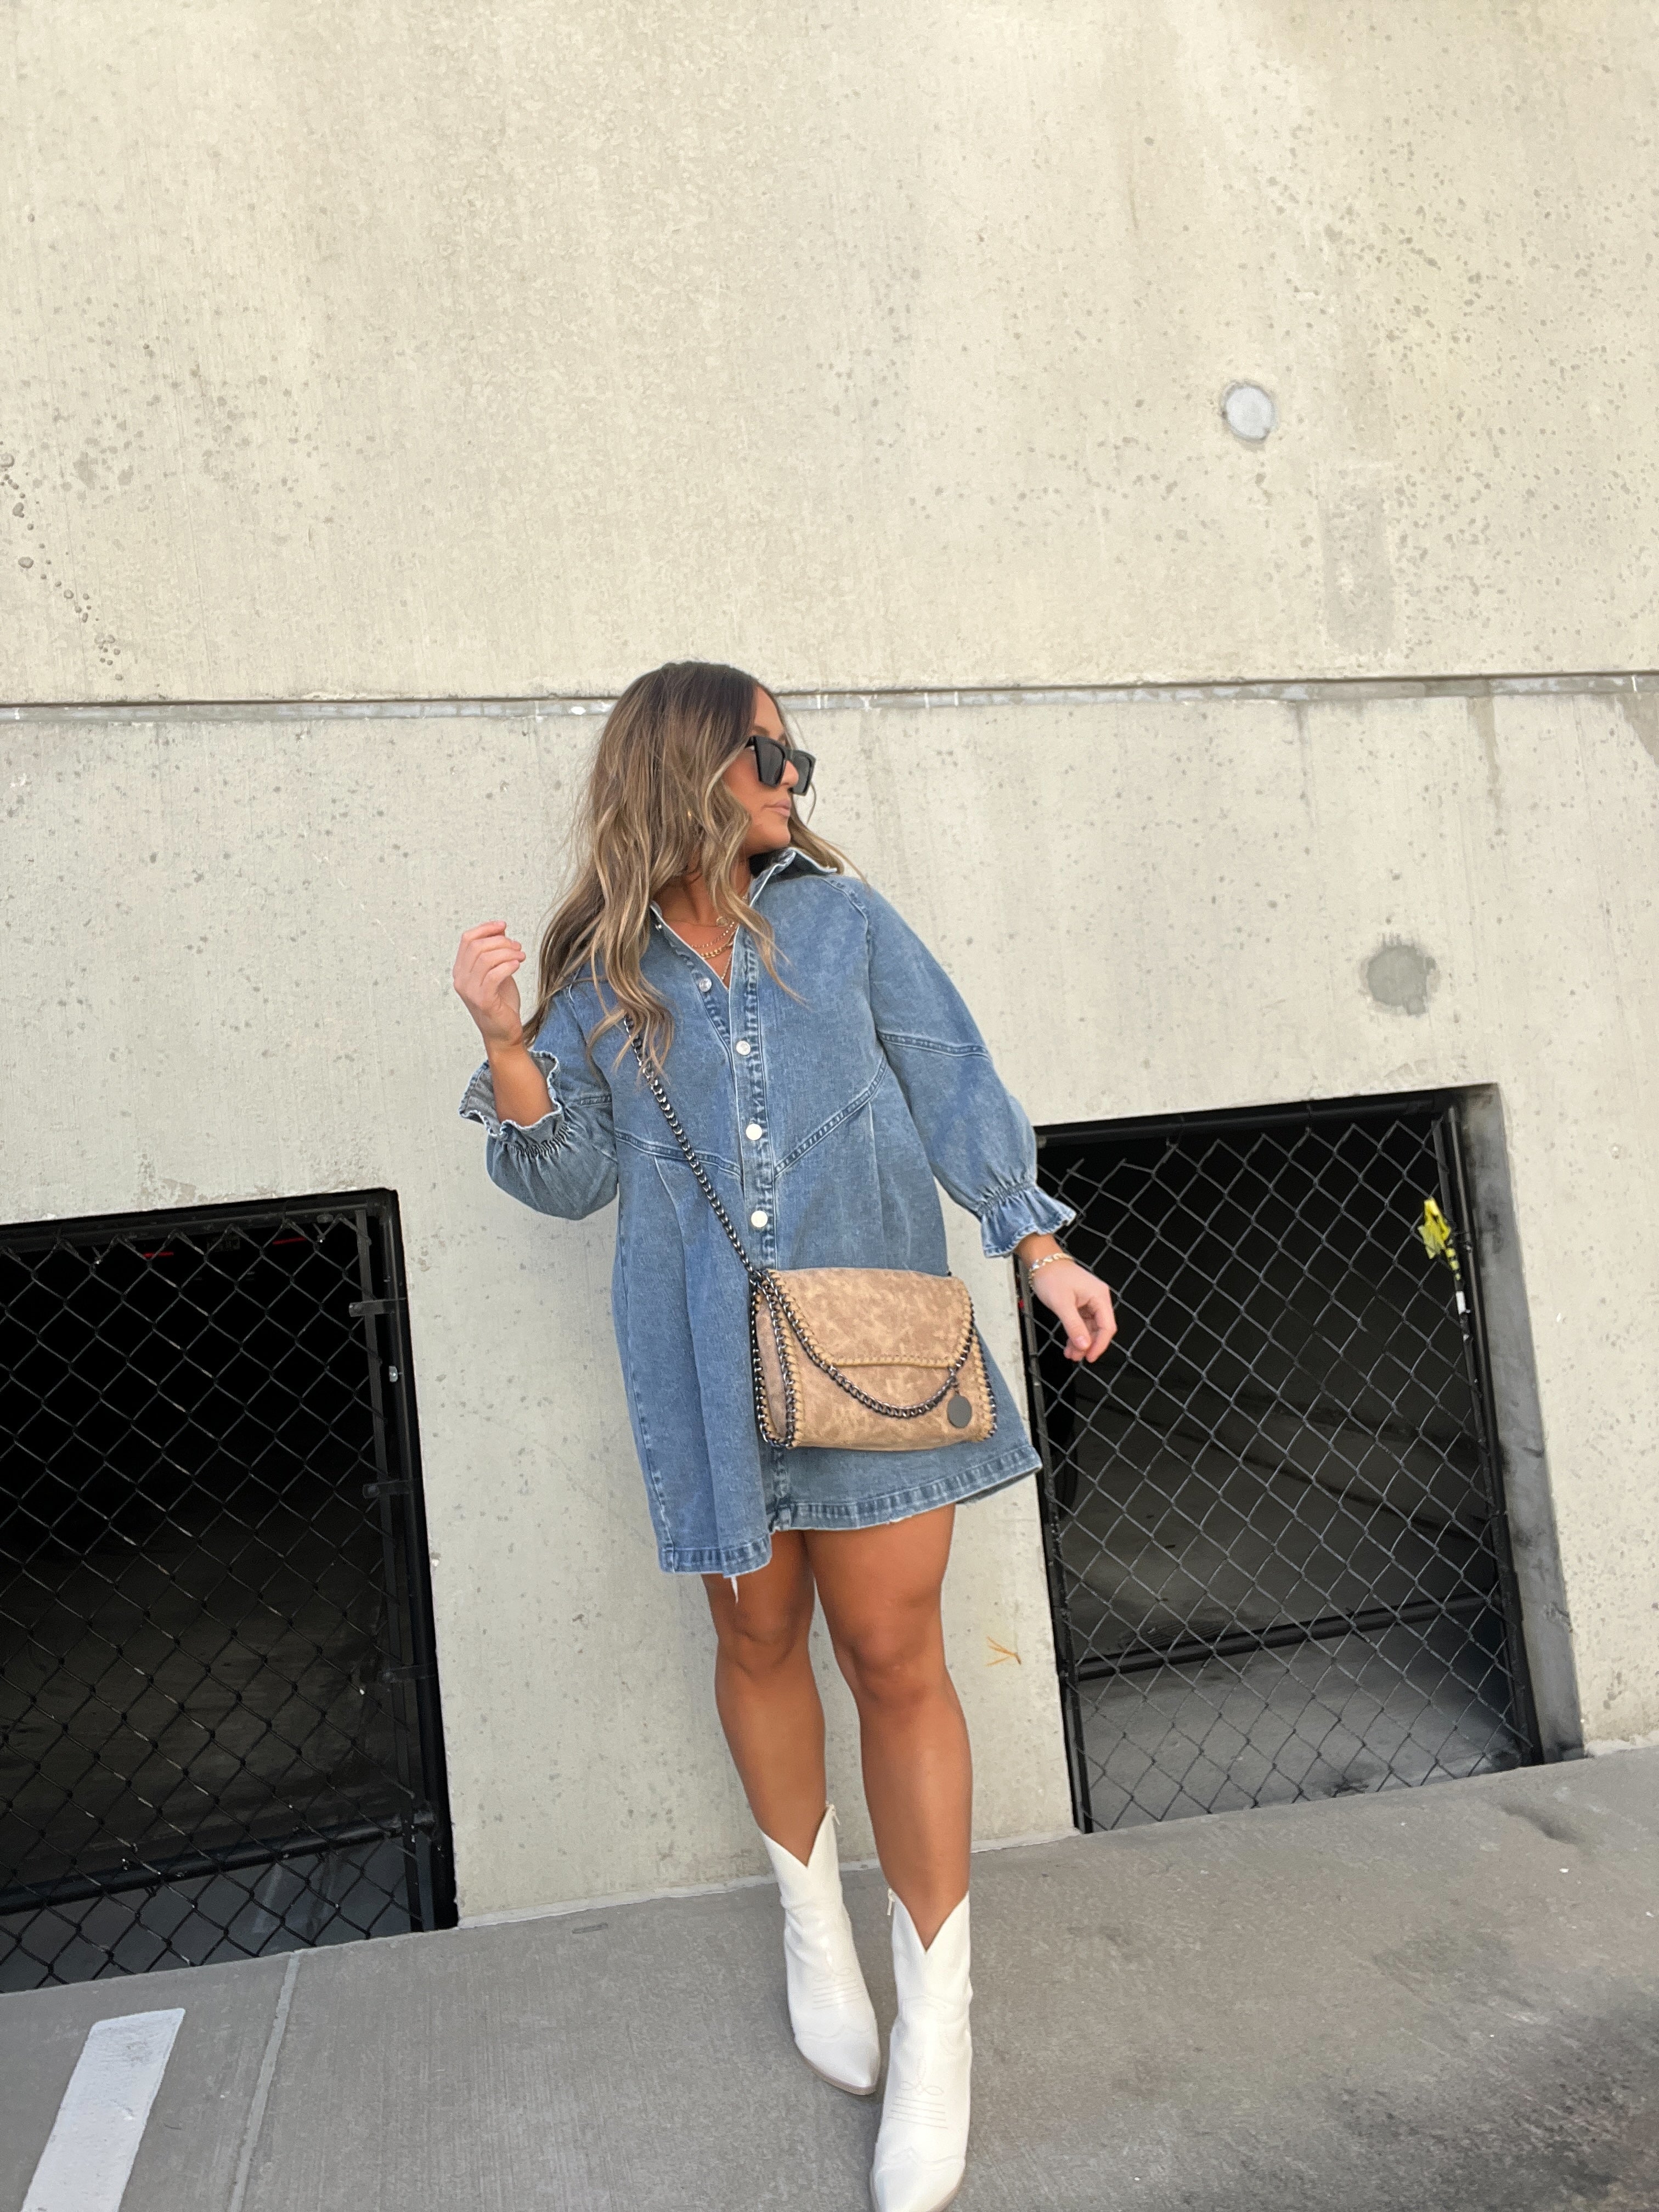 Country Concert Outfit Ideas You'll Want To Recopy | Le Chic Street